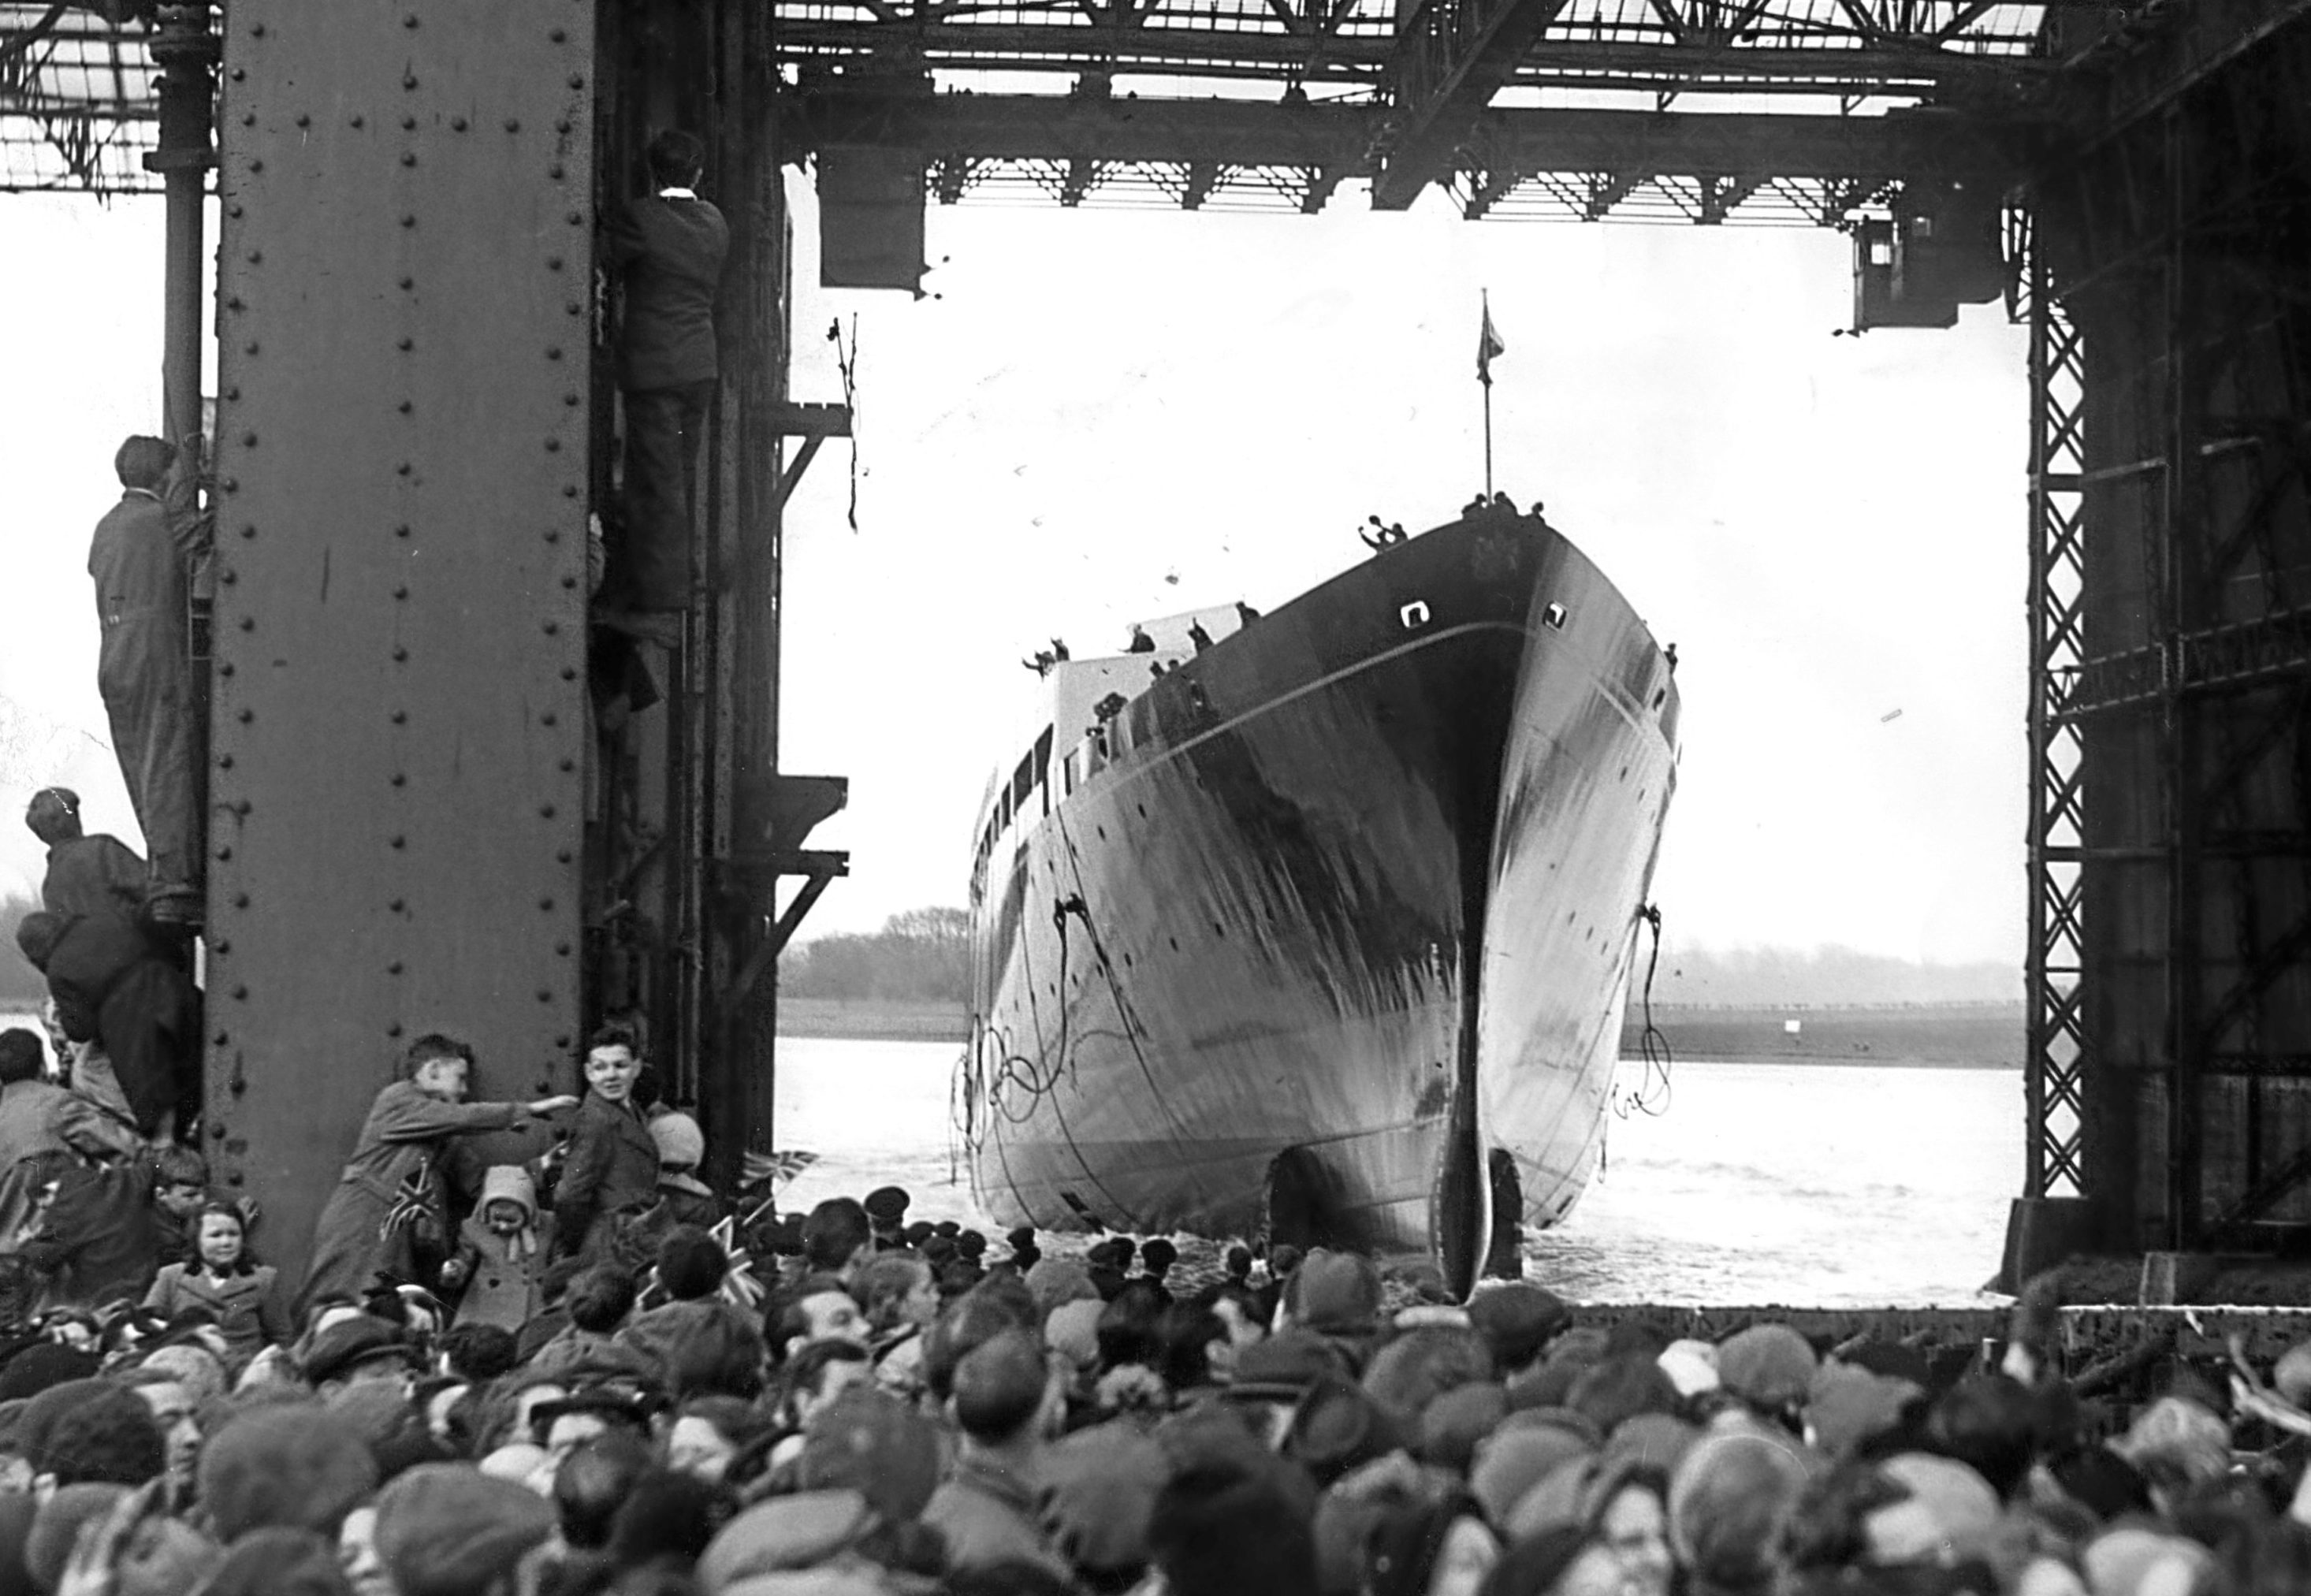 The new Royal Yacht Britannia enters the water after her launch by the Queen at John Brown's shipyards, Clydebank